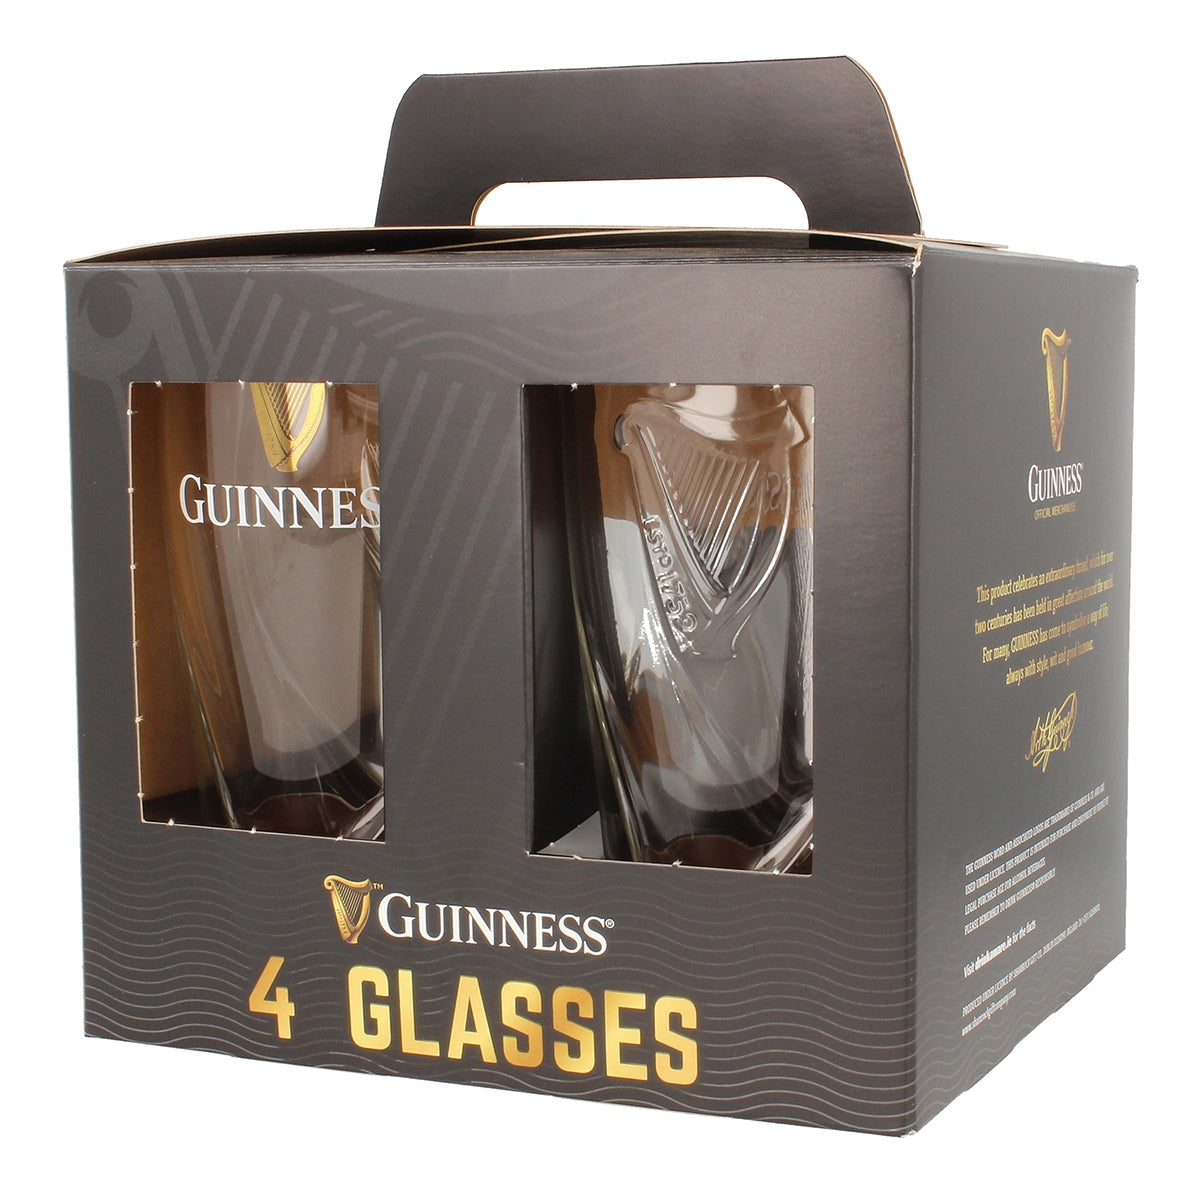 Guinness pint glasses set of 4 - household items - by owner - housewares  sale - craigslist